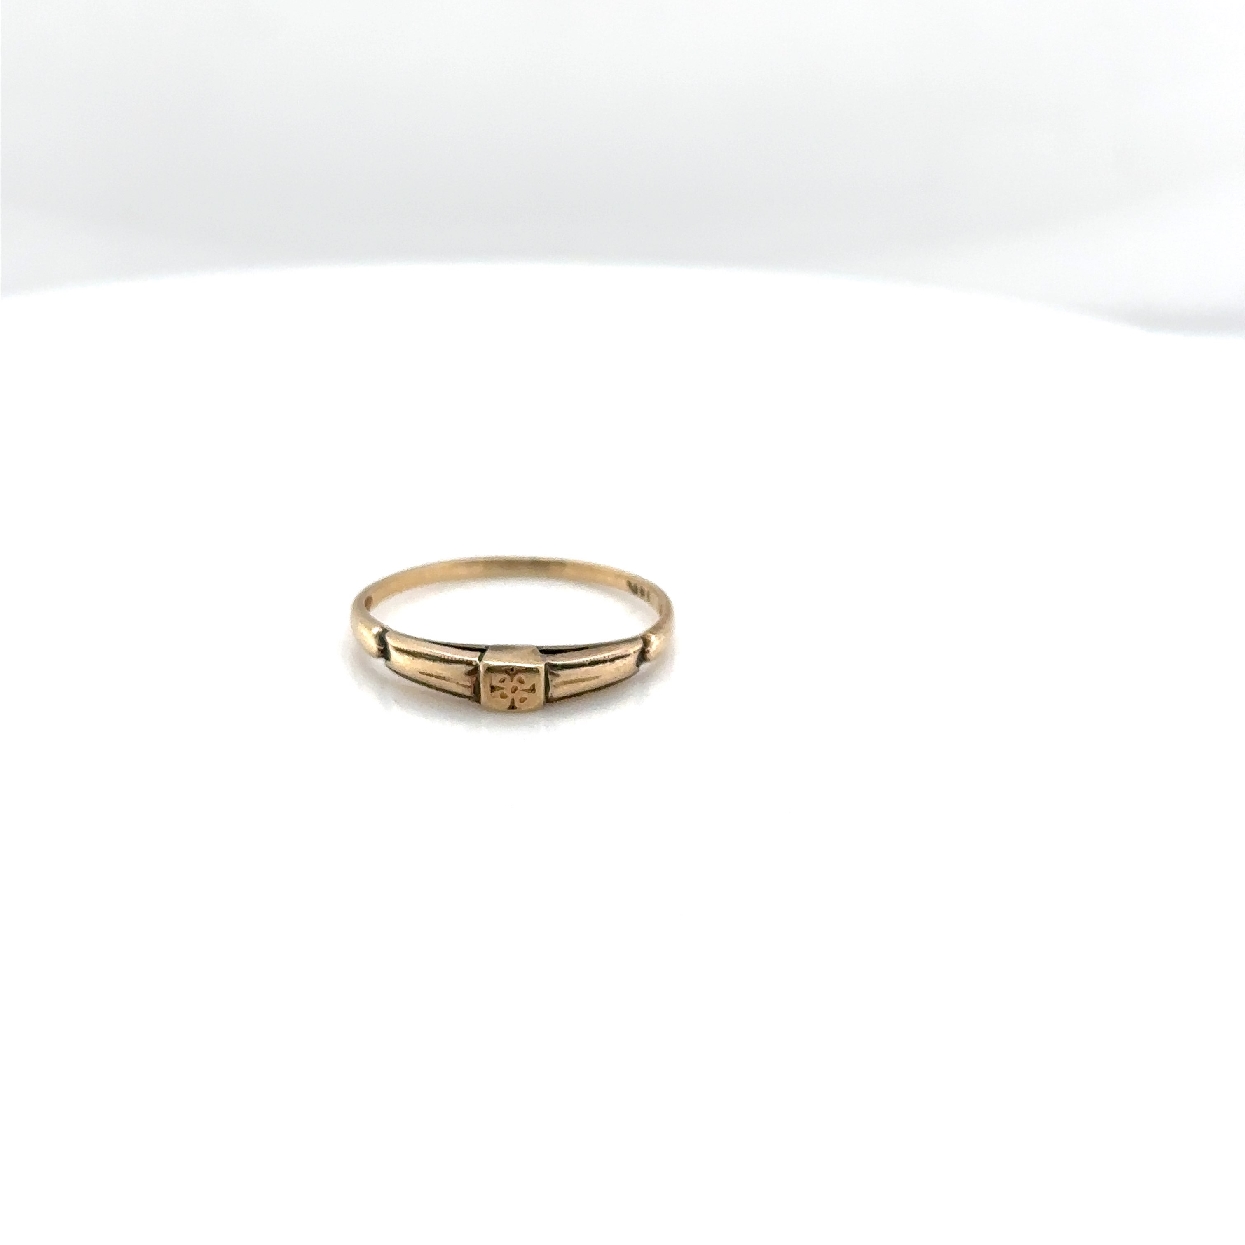 14K Yellow Gold Ring with Etched Design 

Size 5.25